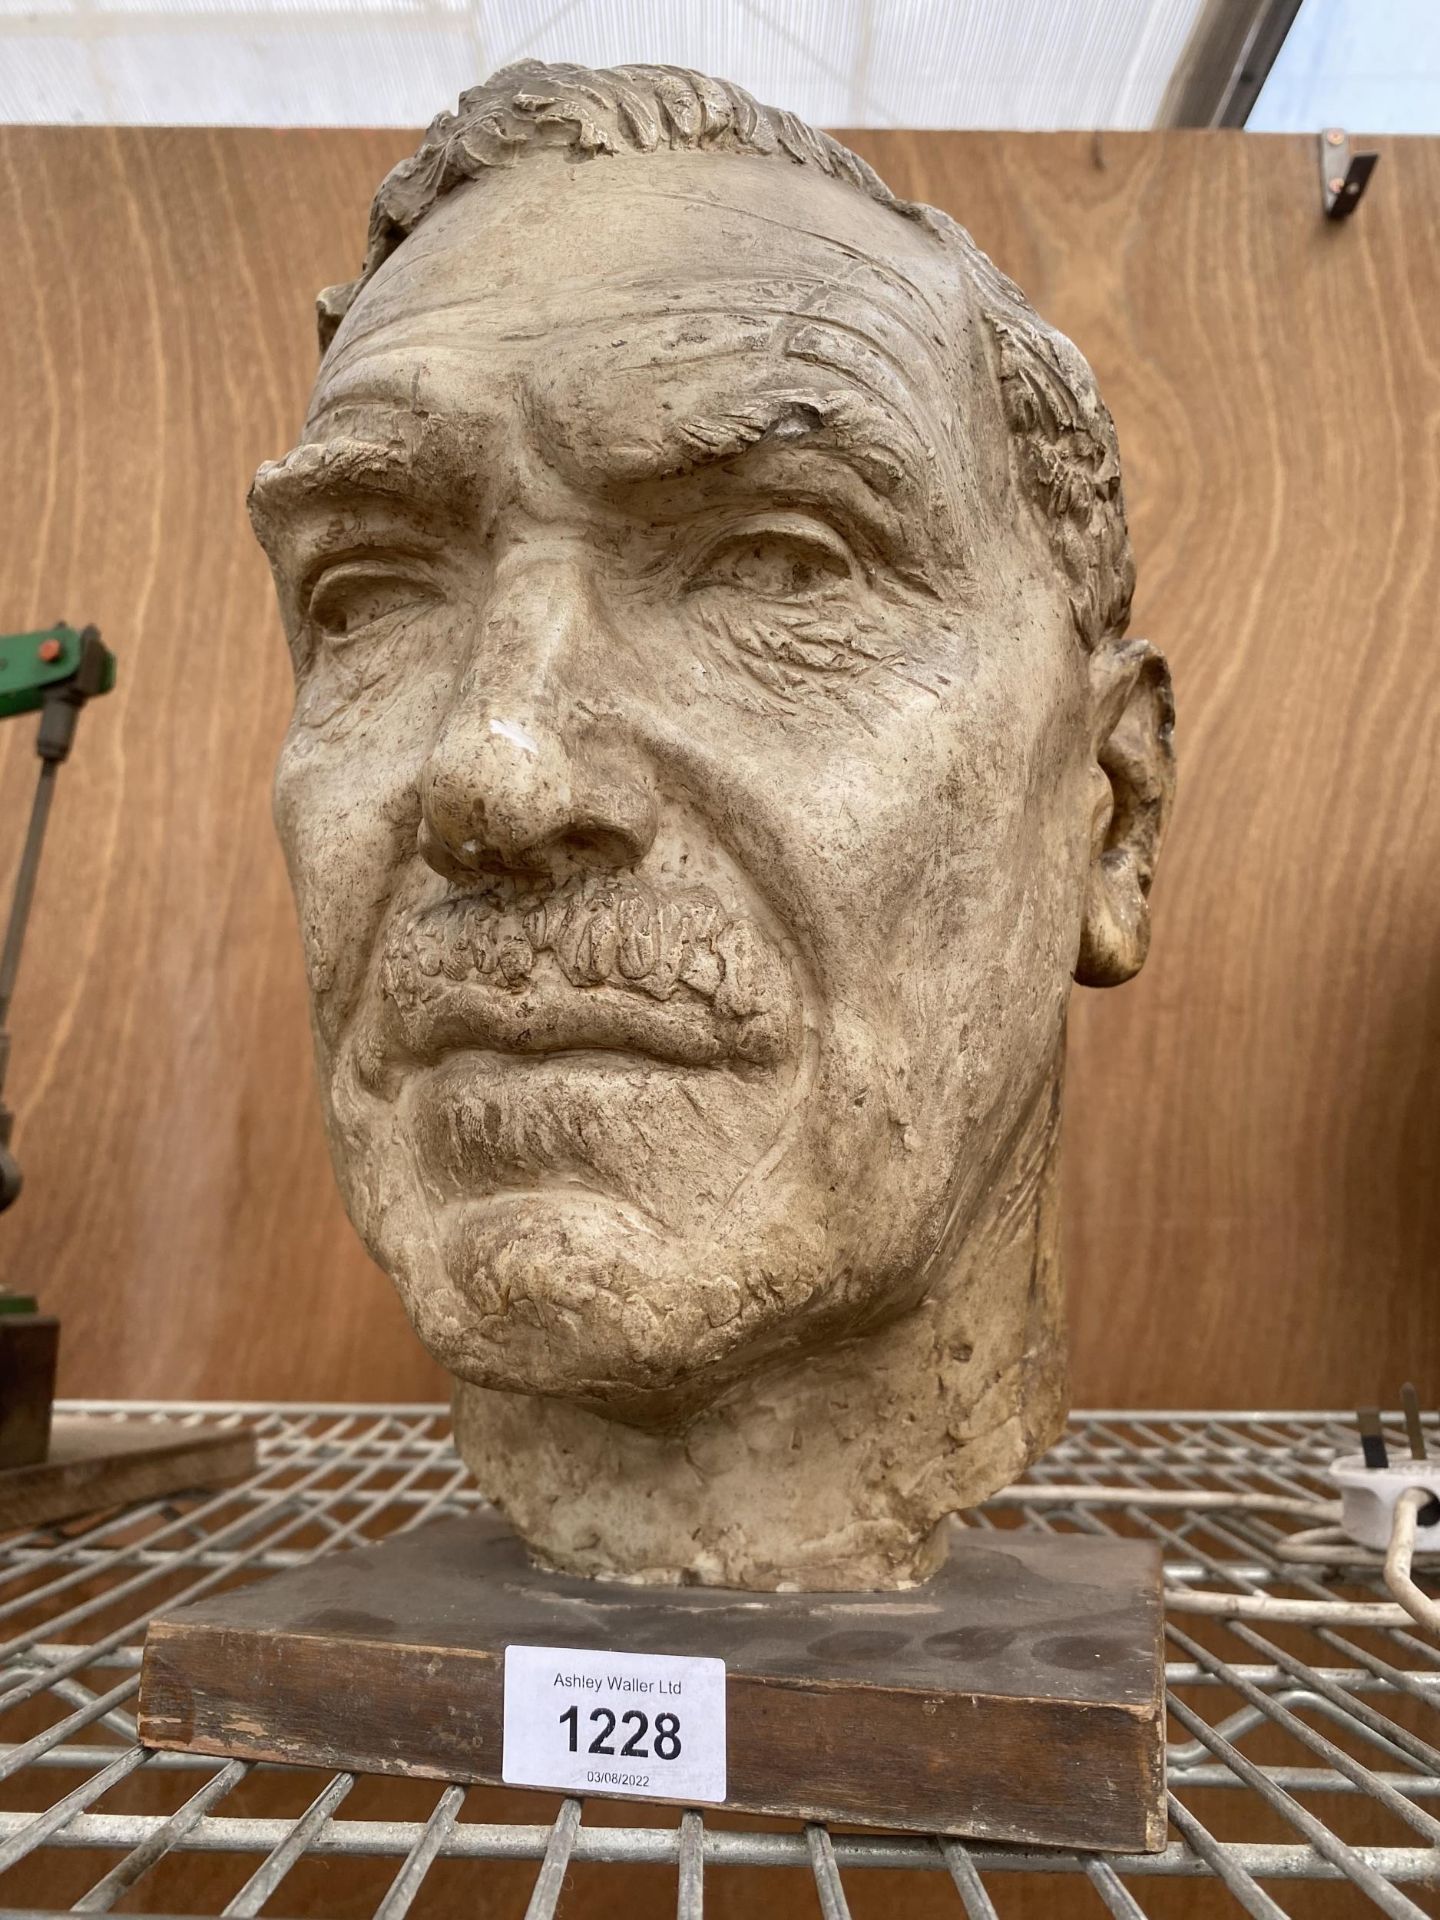 A VINTAGE RESIN BUST OF A MAN